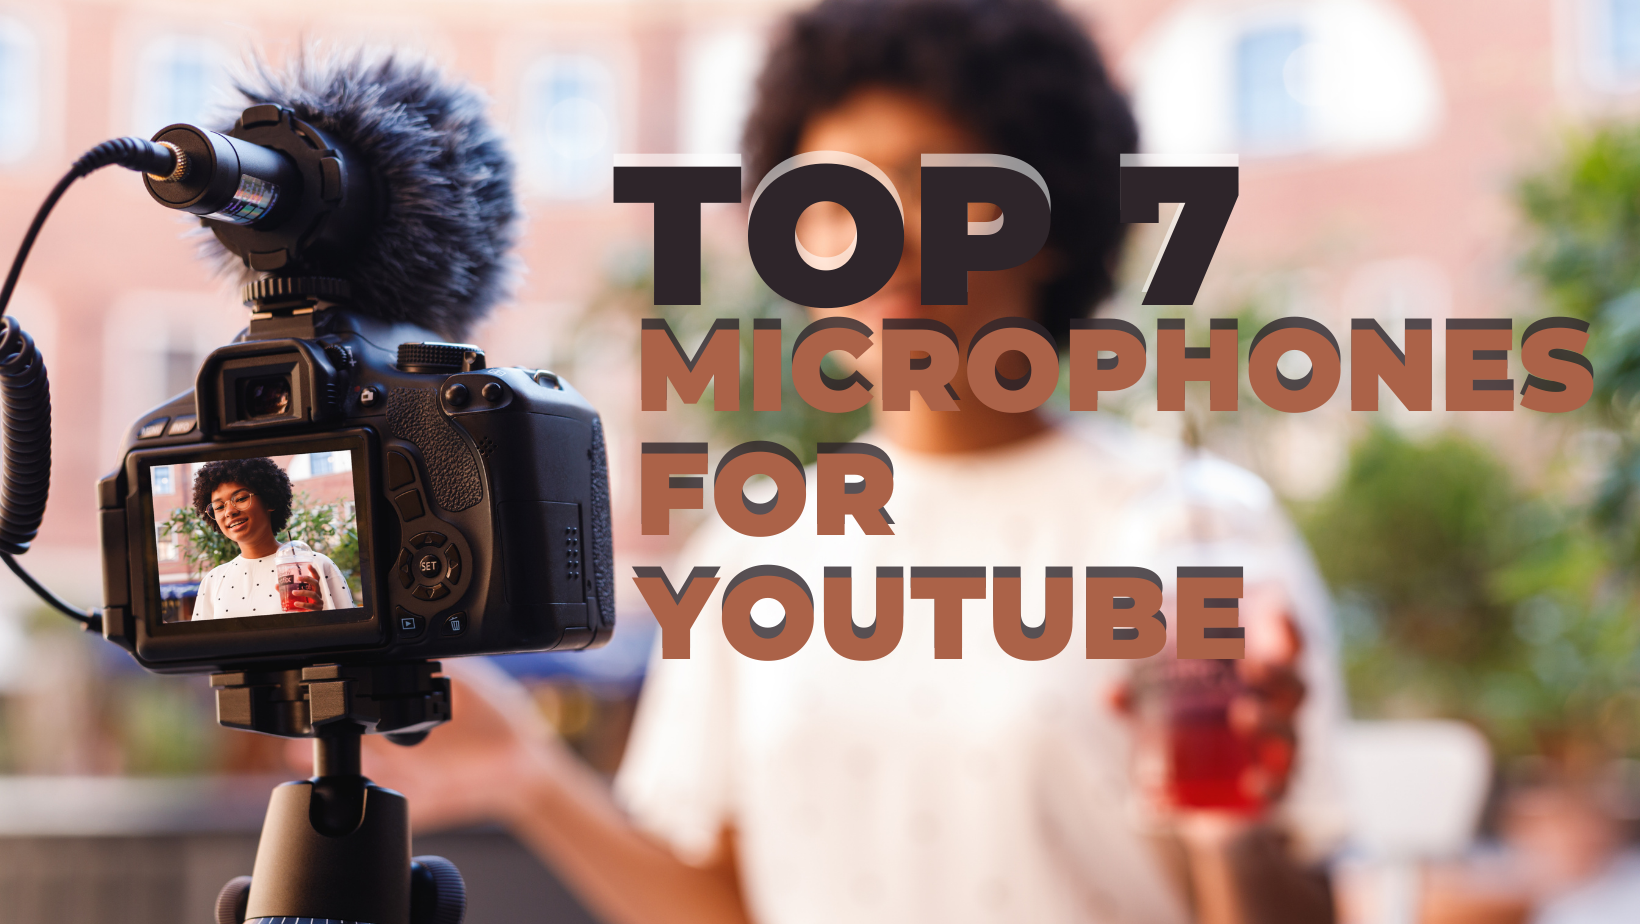 Top 7 Microphones For YouTube